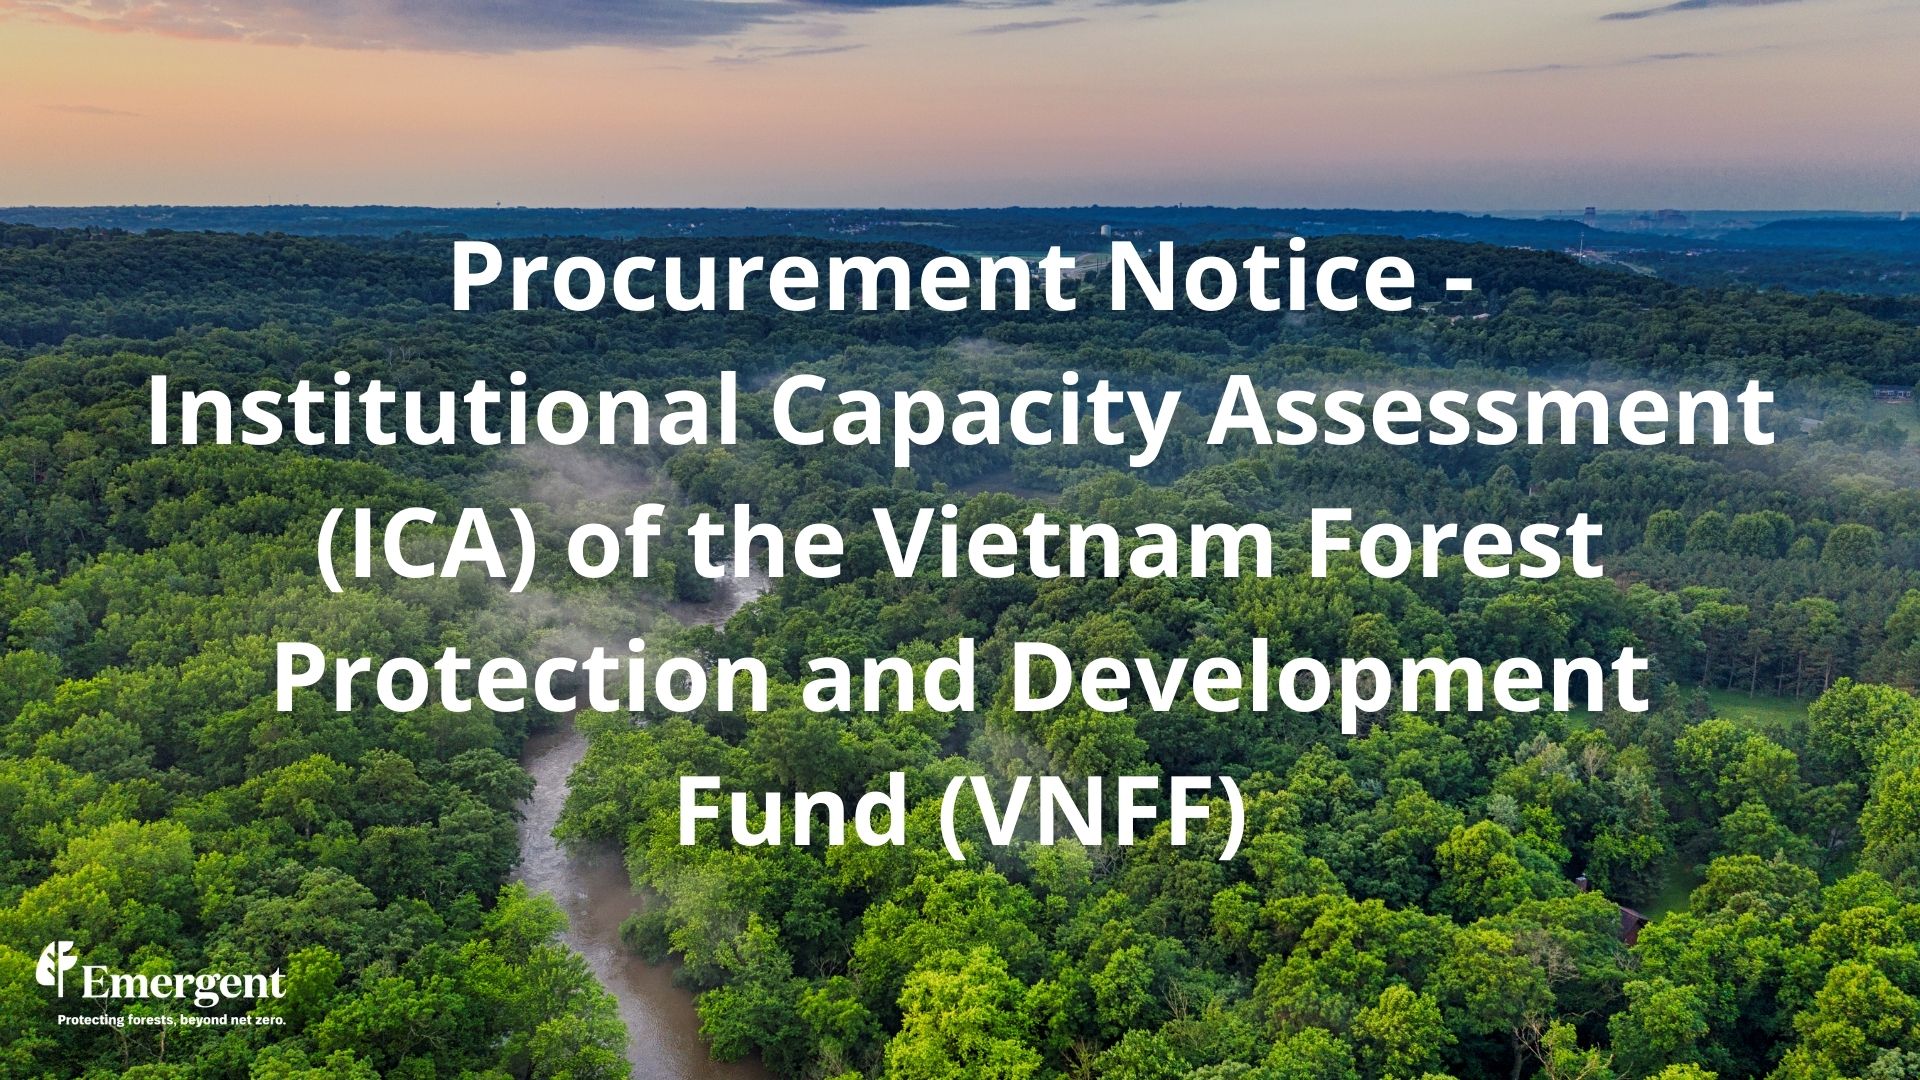 Procurement Notice - Institutional Capacity Assessment (ICA) of the Vietnam Forest Protection and Development Fund (VNFF)